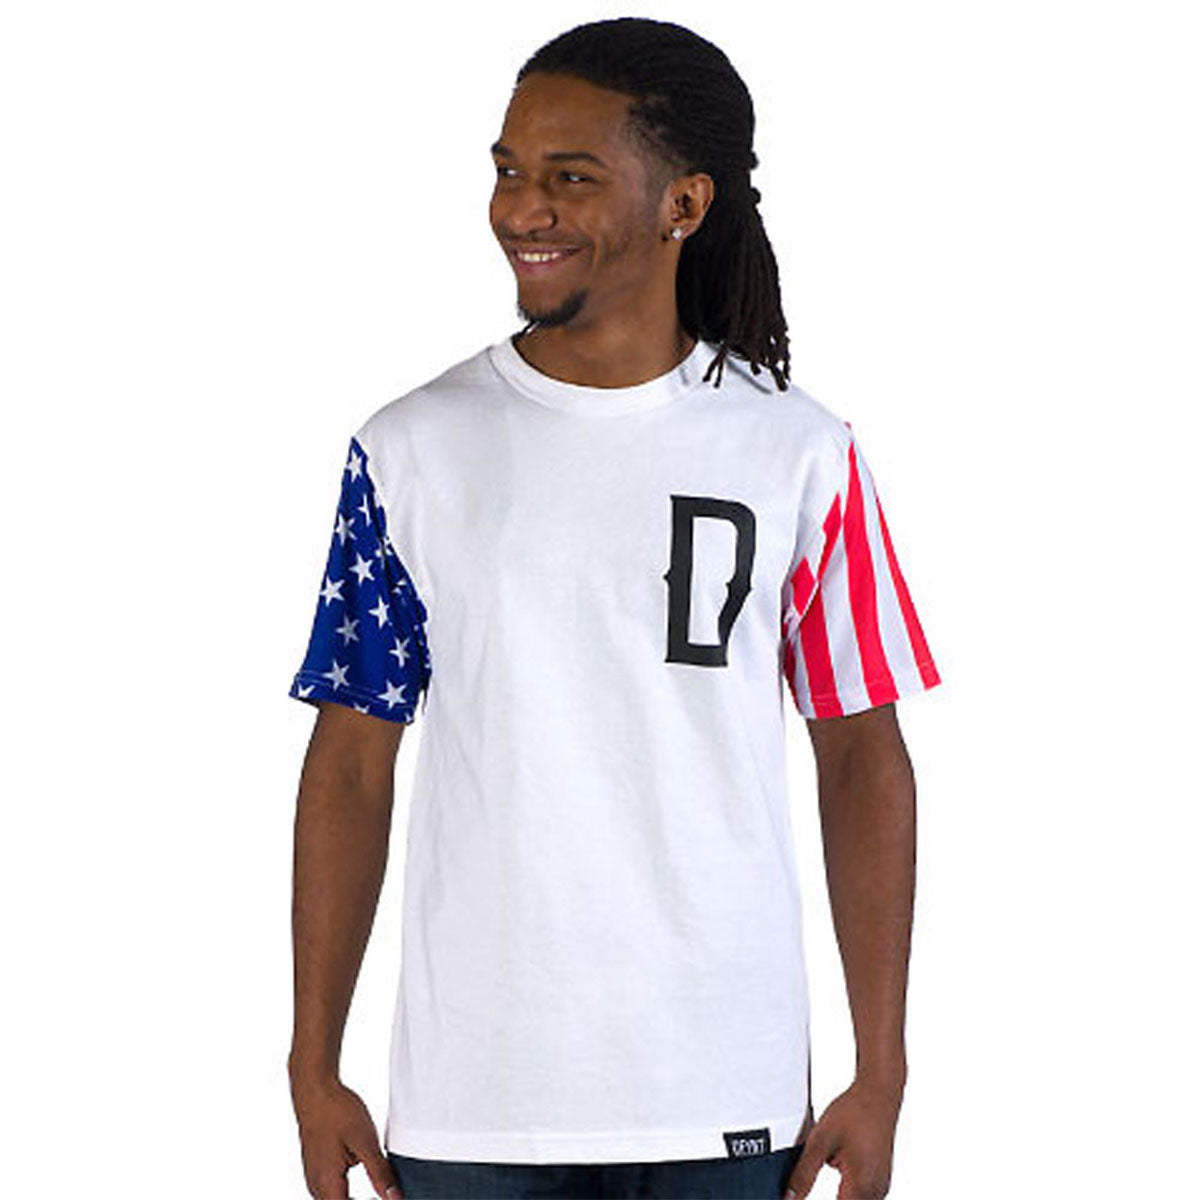 Defyant Stars And Stripes Men's Short-Sleeve Shirts-X000L5GY8R